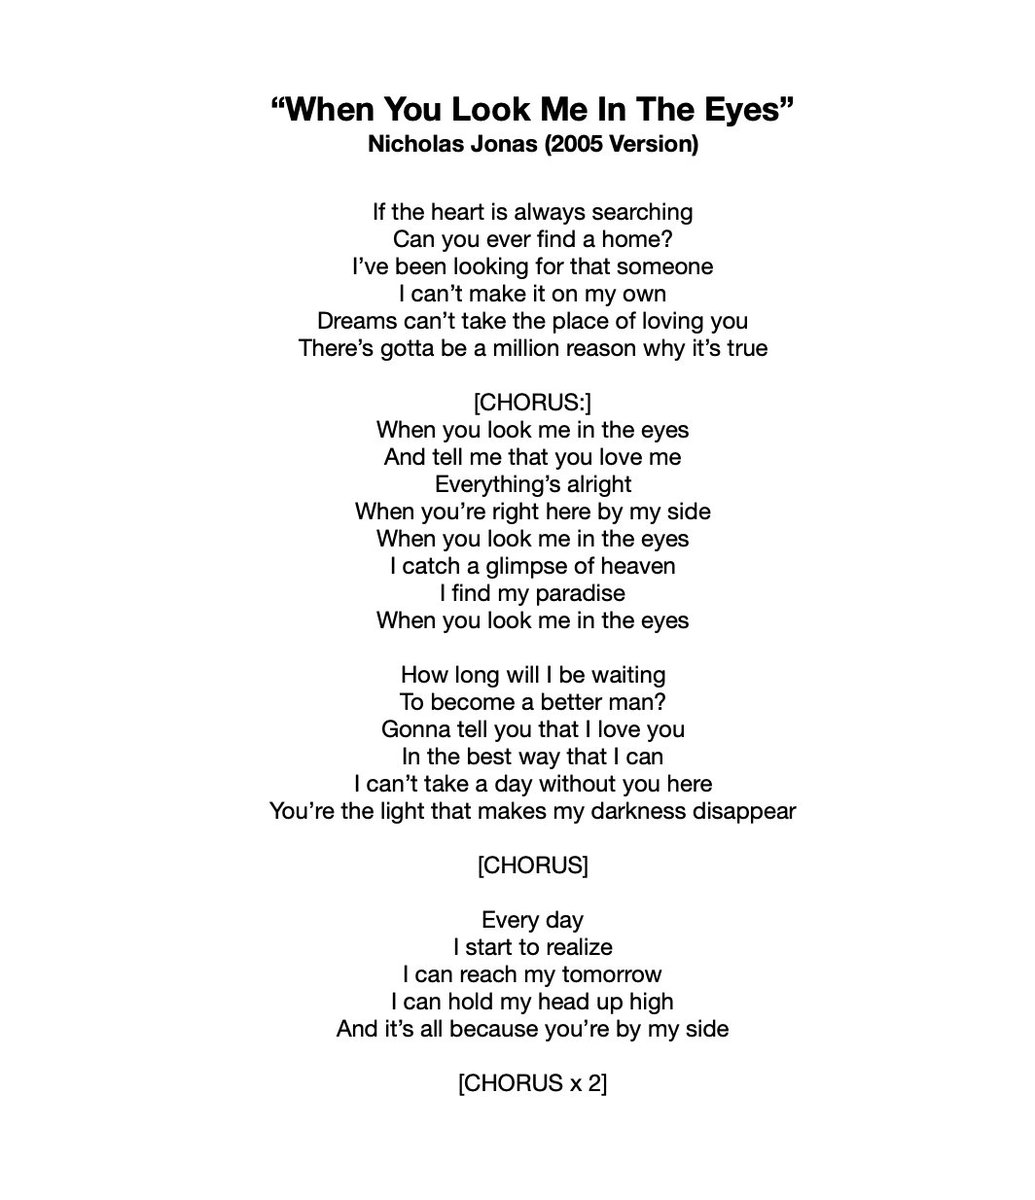 “When You Look Me In The Eyes” was originally released in 2005, but had religious undertones. After Nick met Miley, the song was released again with slightly altered lyrics to make it sound more romantic.